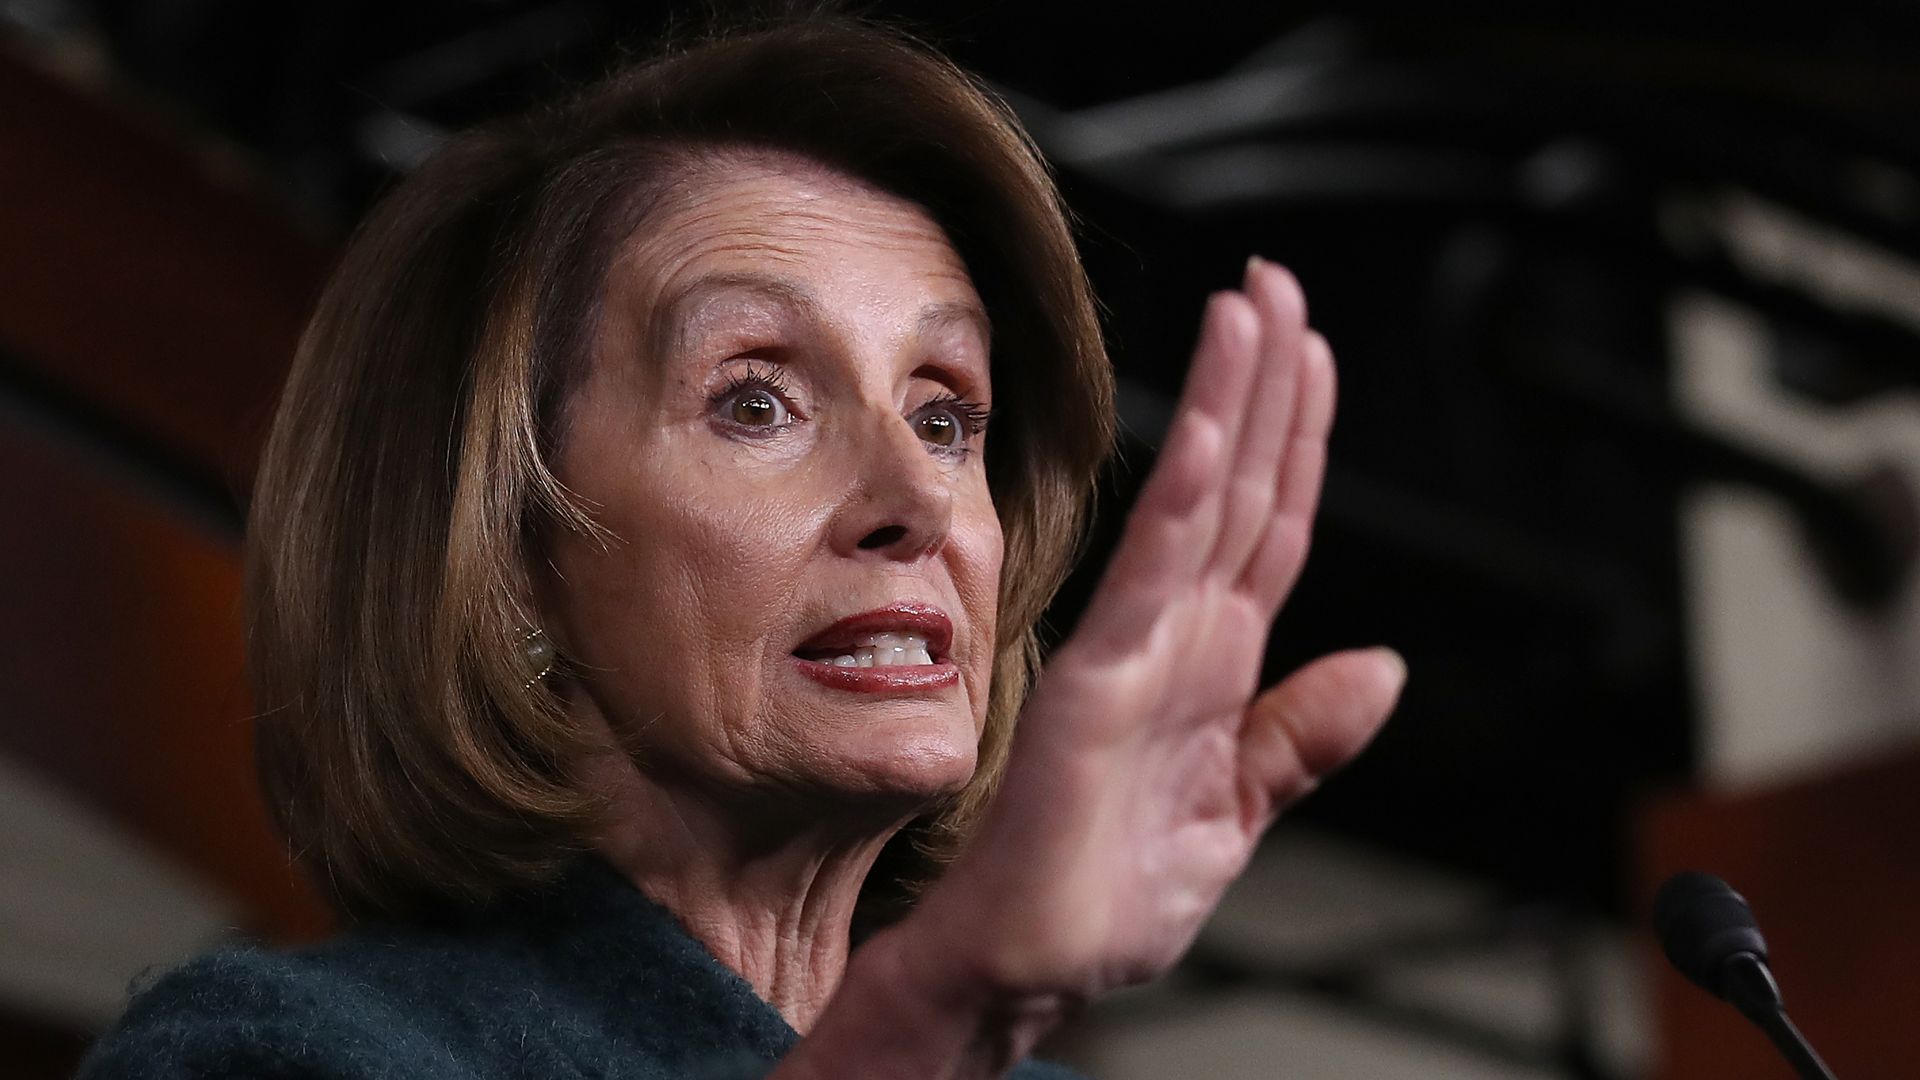 In this image, Pelosi speaks and holds up a hand.